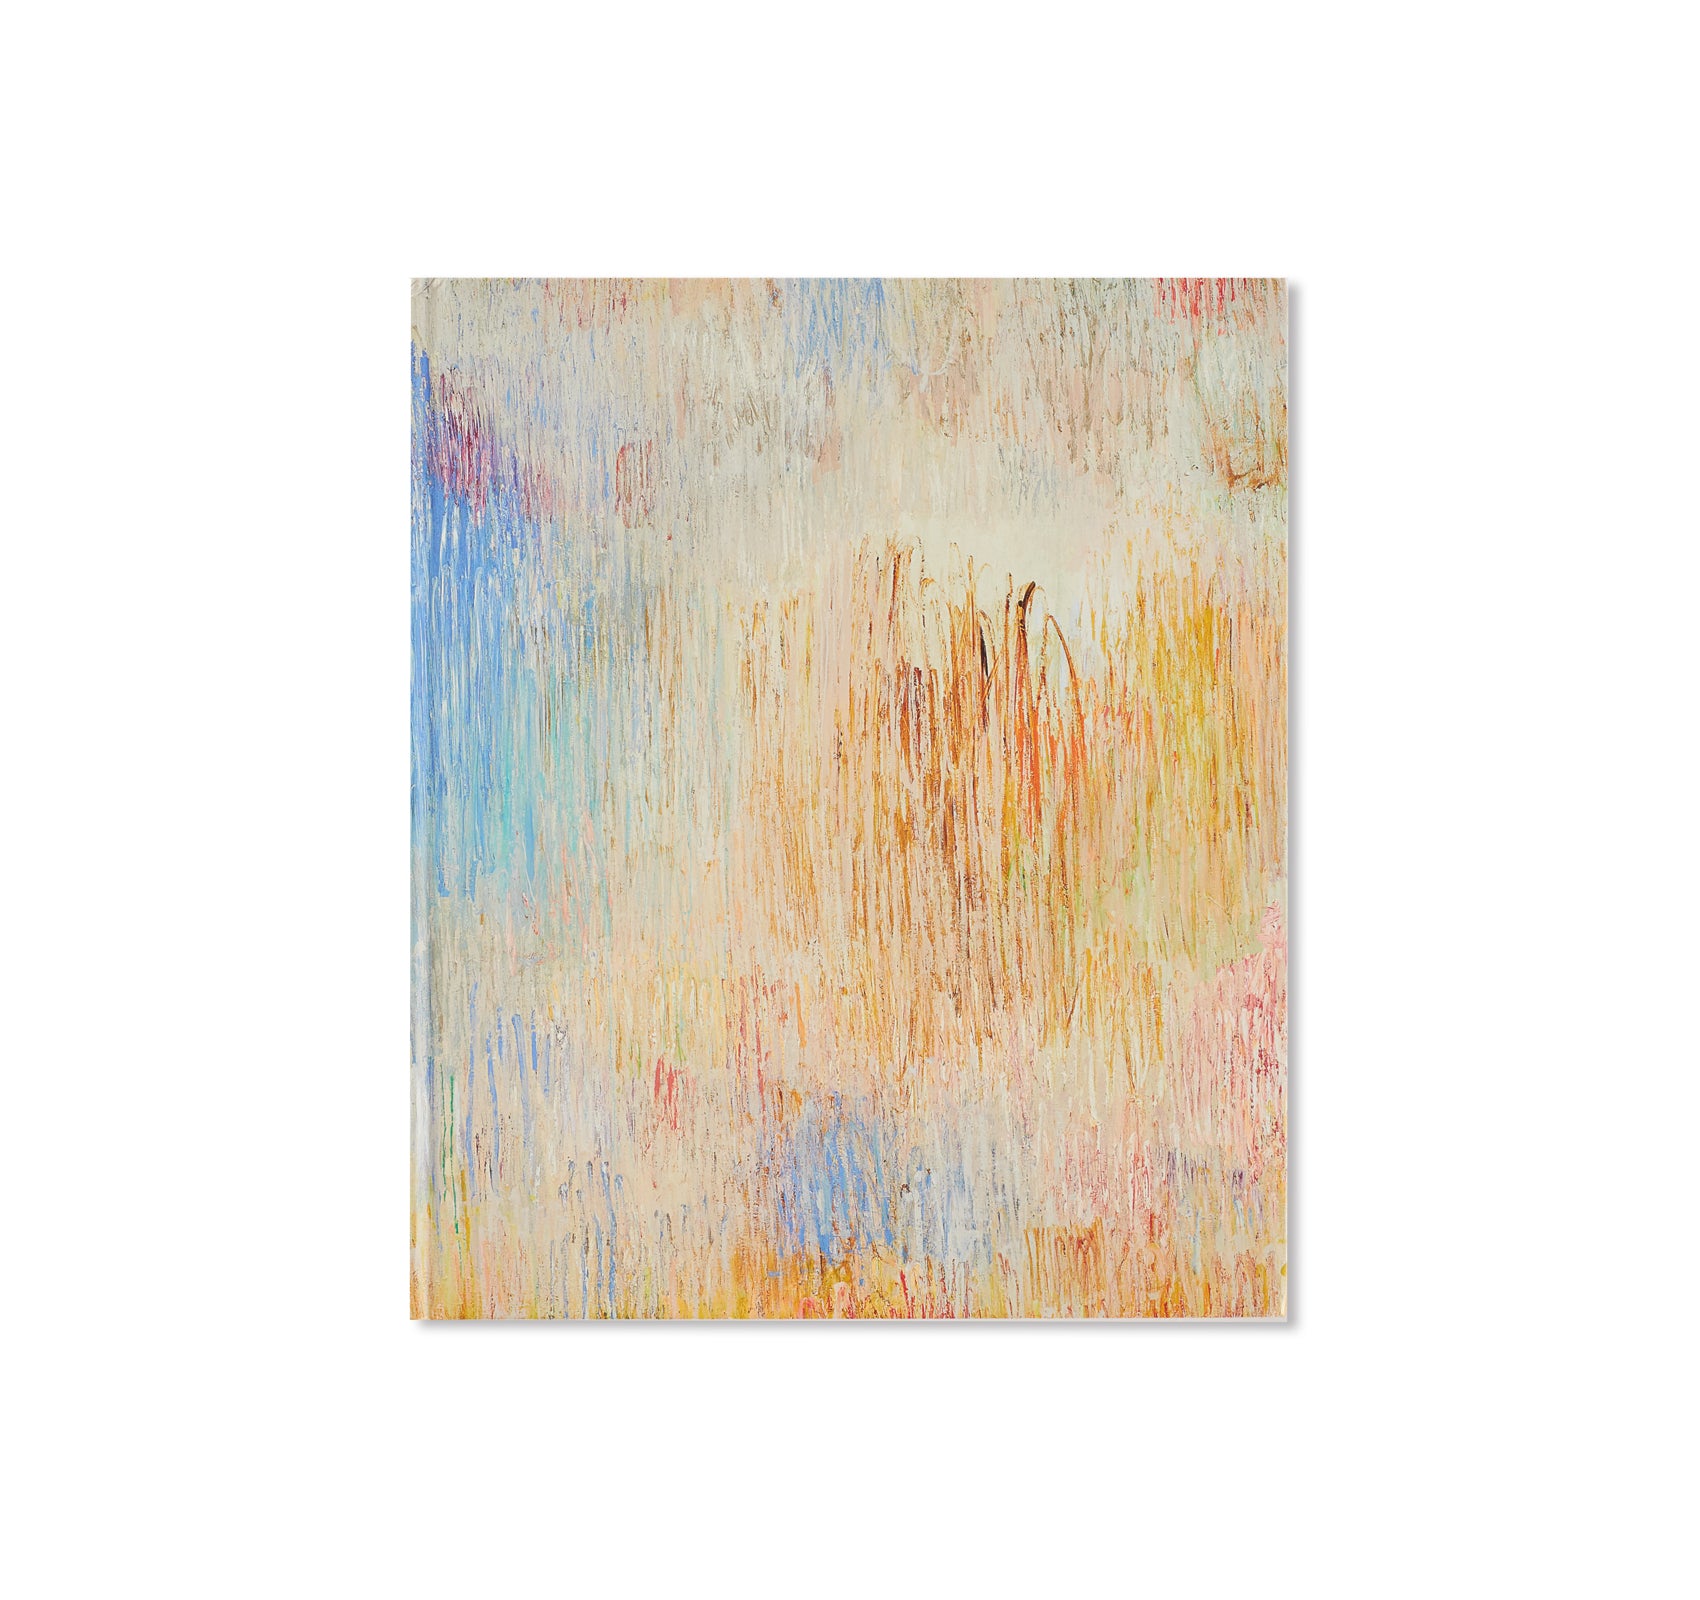 NEW PAINTING by Christopher Le Brun